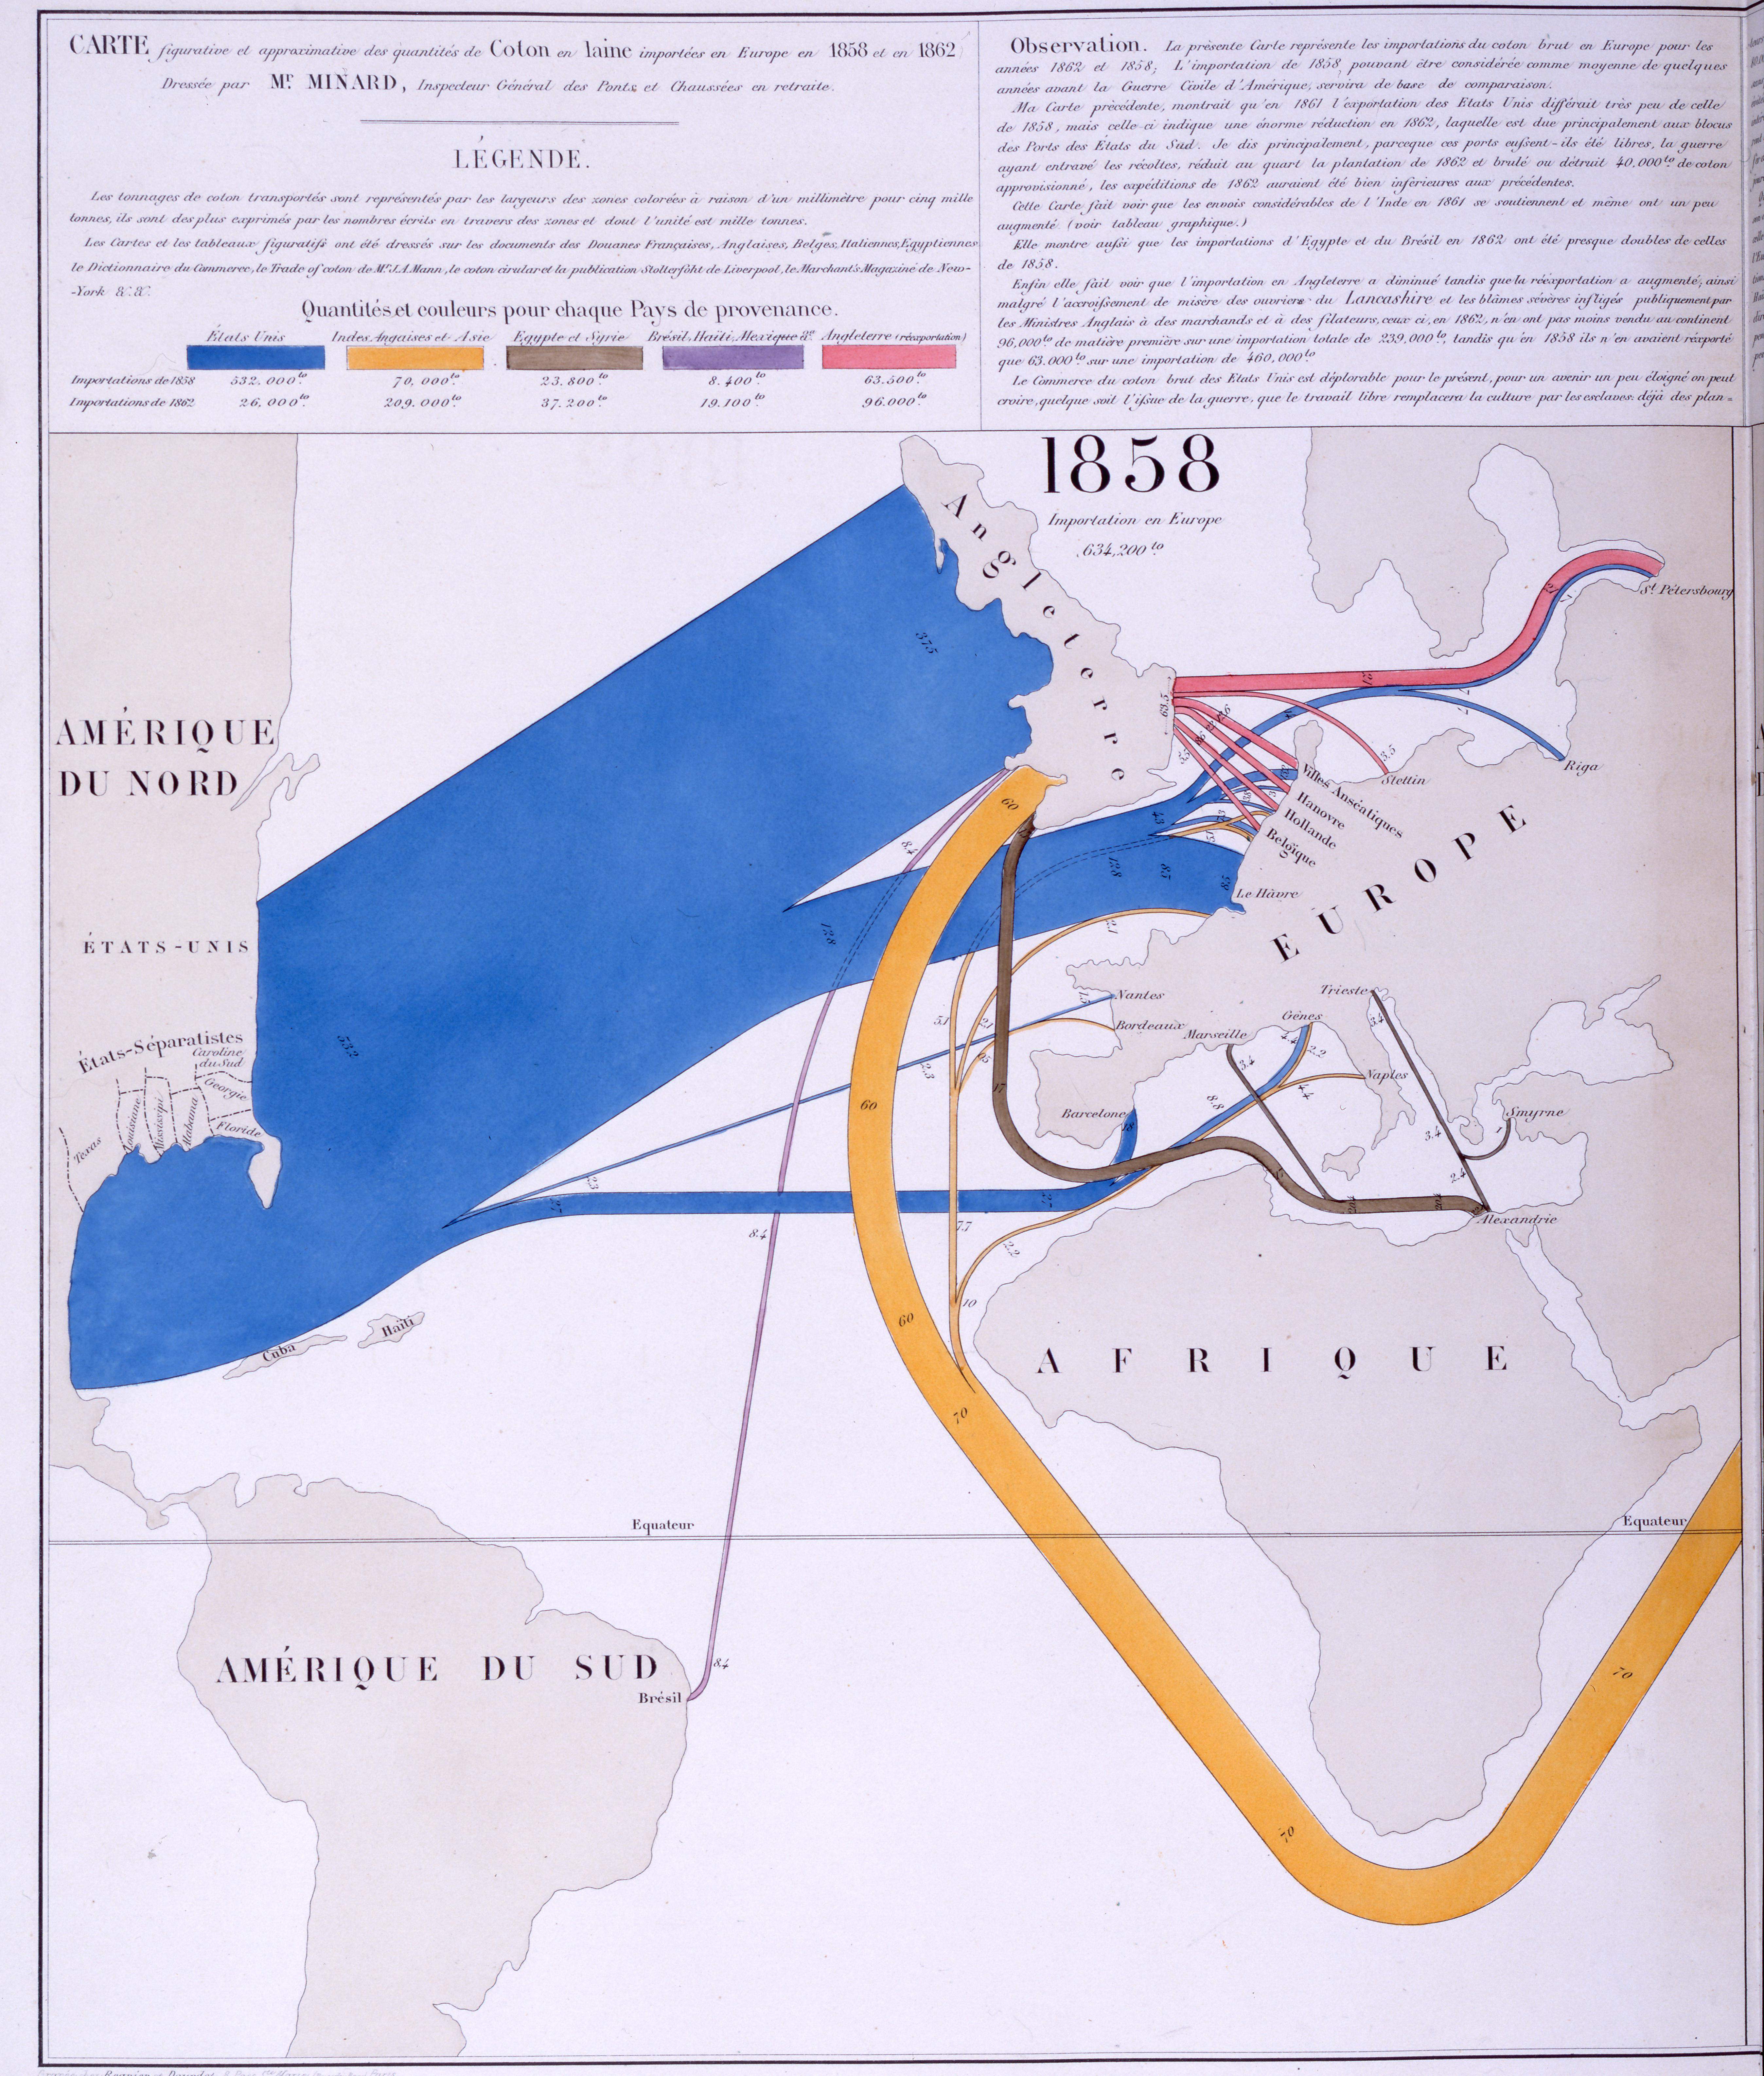 Comparative flow maps: Effect of the US Civil War on trade in cotton.